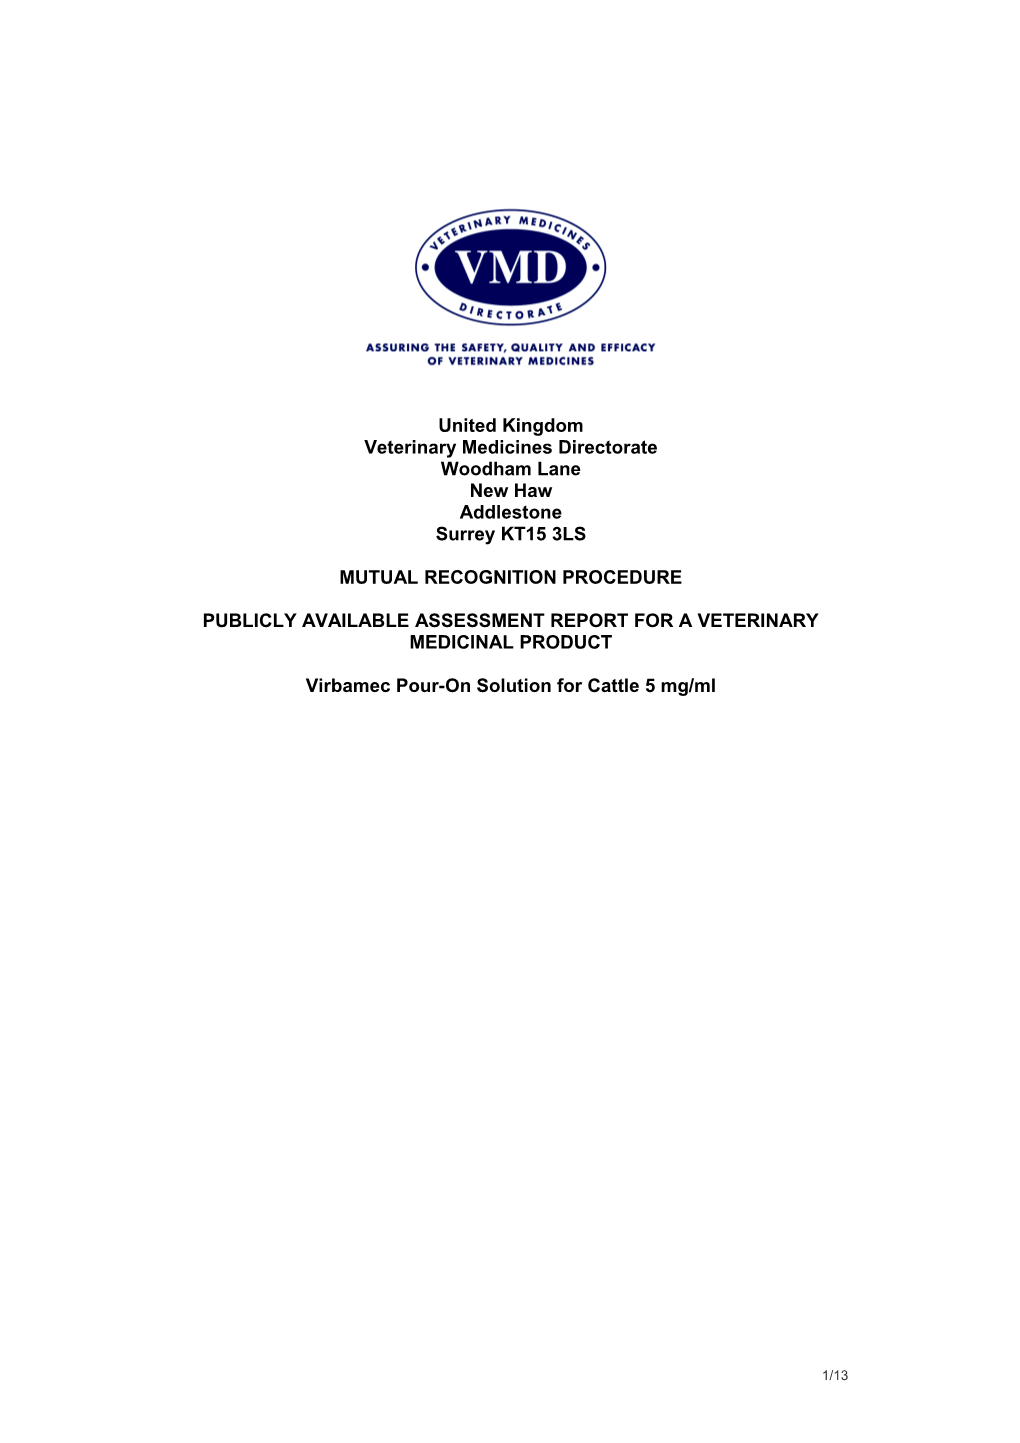 Publicly Available Assessment Report for a Veterinary Medicinal Product s10